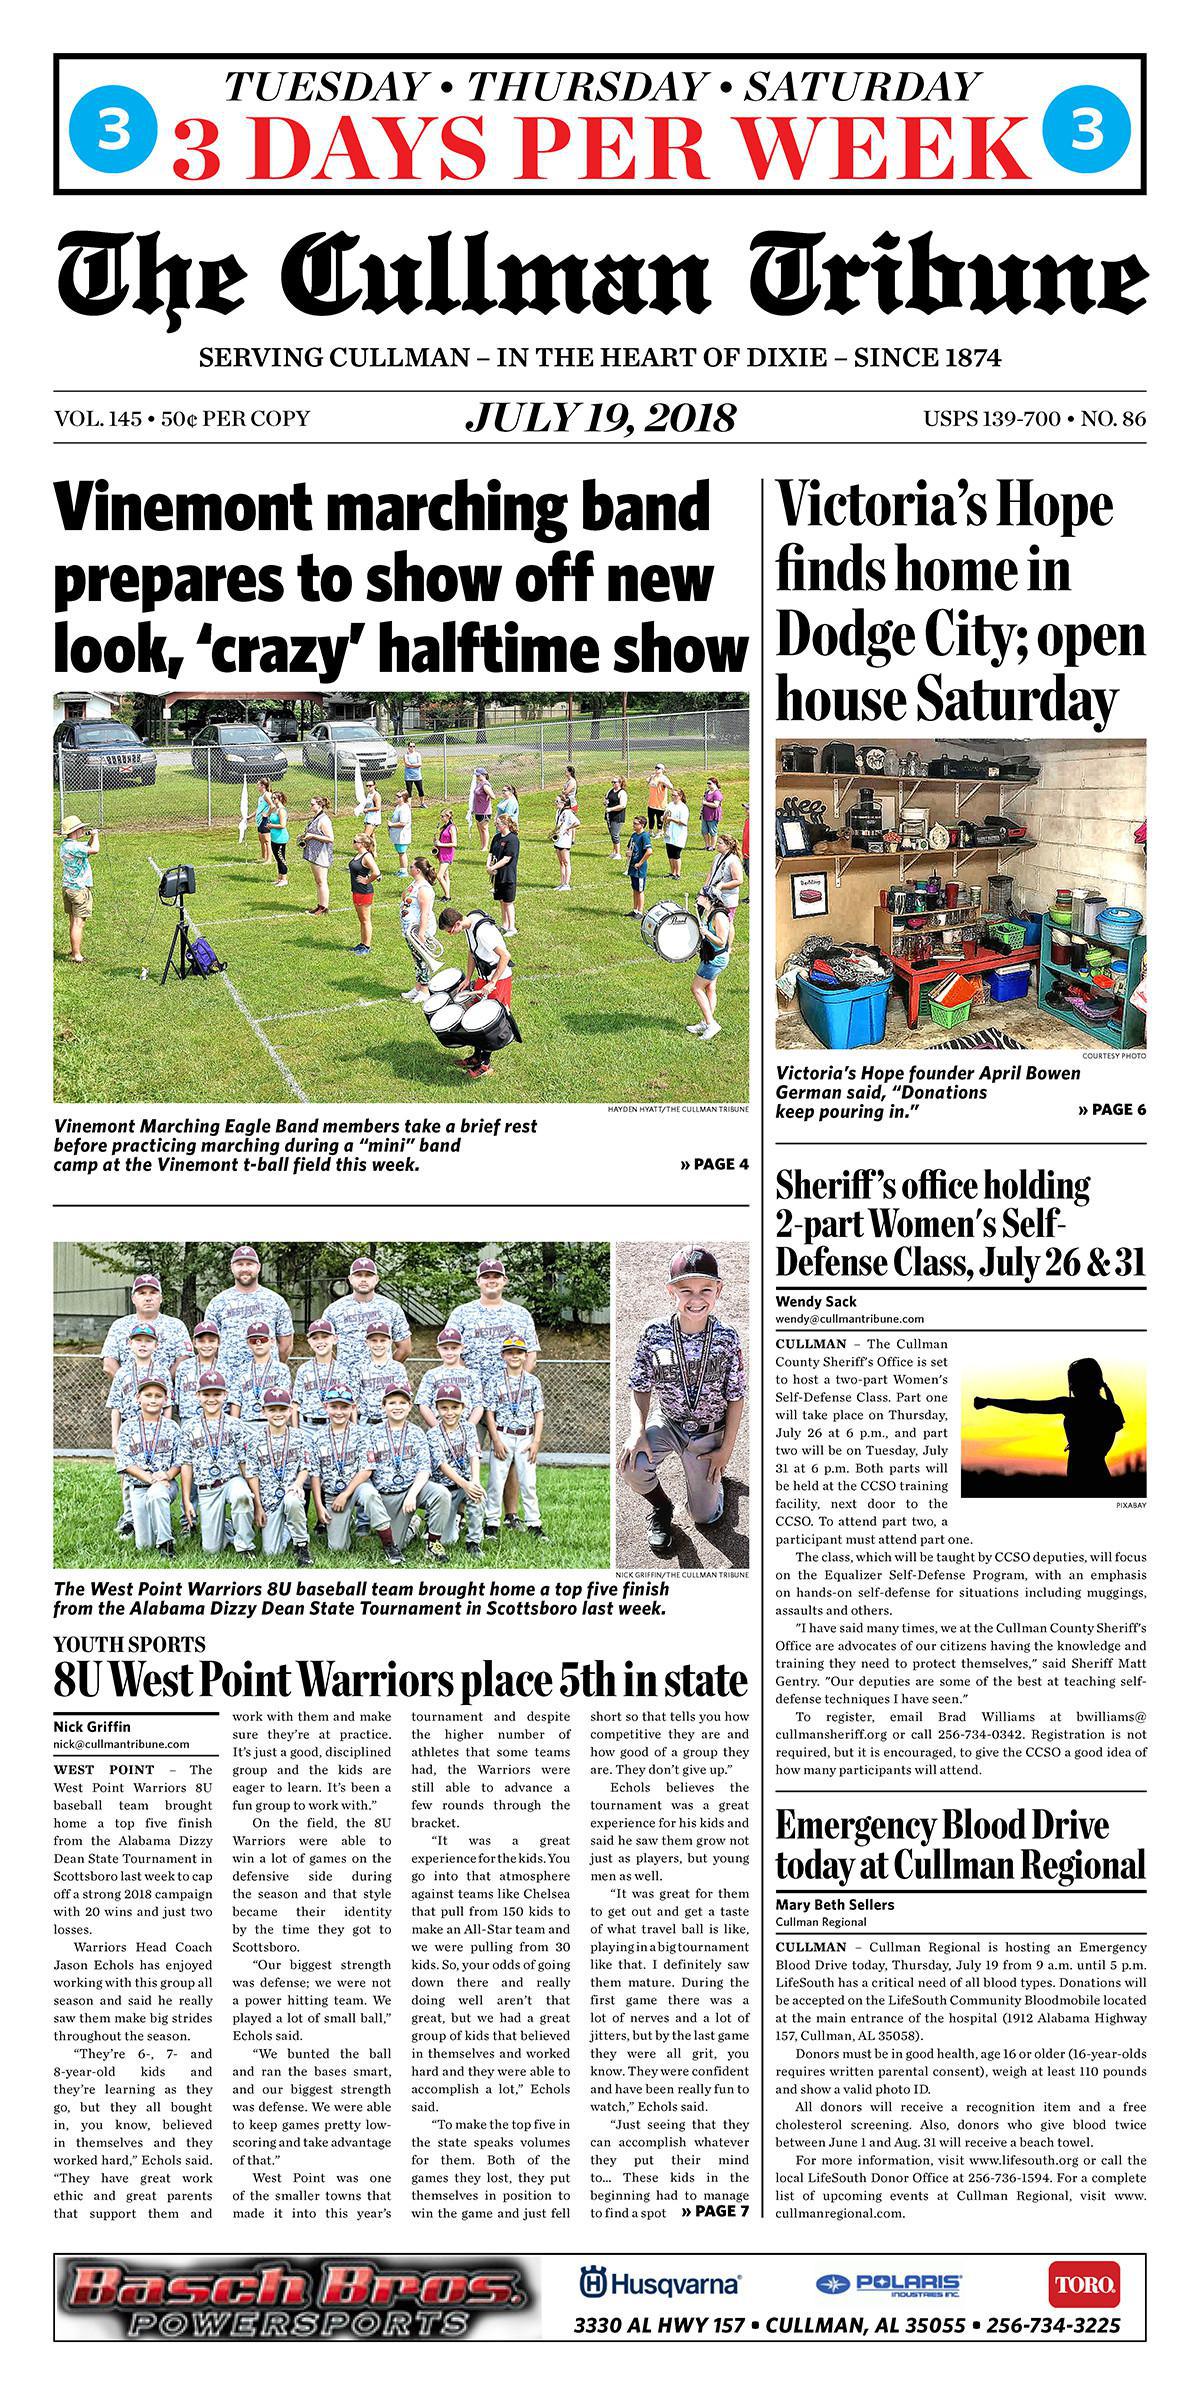 Good Morning Cullman! The 07-19-2018 edition of the Cullman Tribune is now ready to view